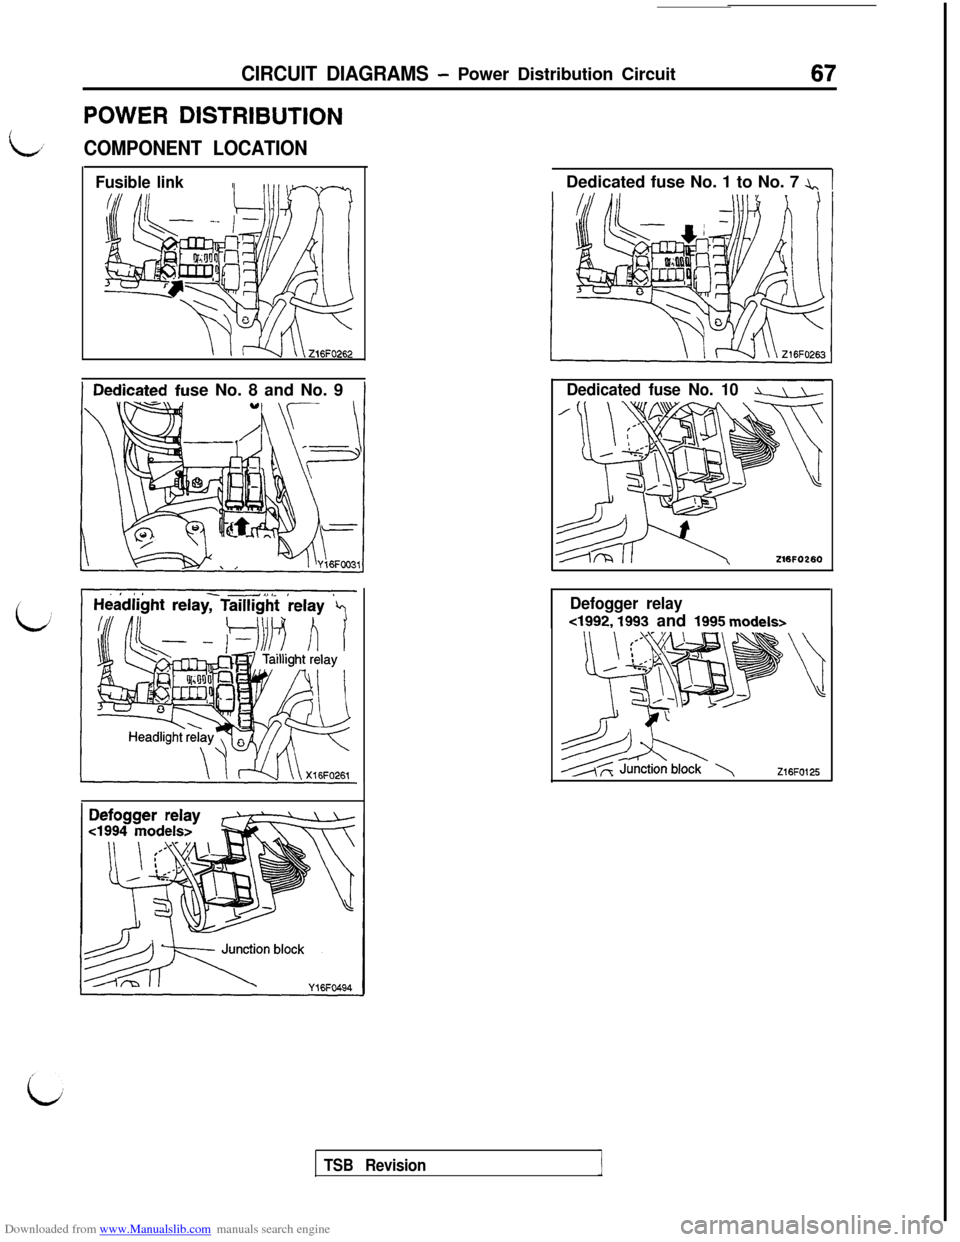 MITSUBISHI 3000GT 1995 2.G Workshop Manual Downloaded from www.Manualslib.com manuals search engine CIRCUIT DIAGRAMS - Power Distribution Circuit67
POWER DISTRIBUTION
L,’COMPONENT LOCATION
Fusible linkse No. 8 and No. 9Dedicated fuse No. 1 t